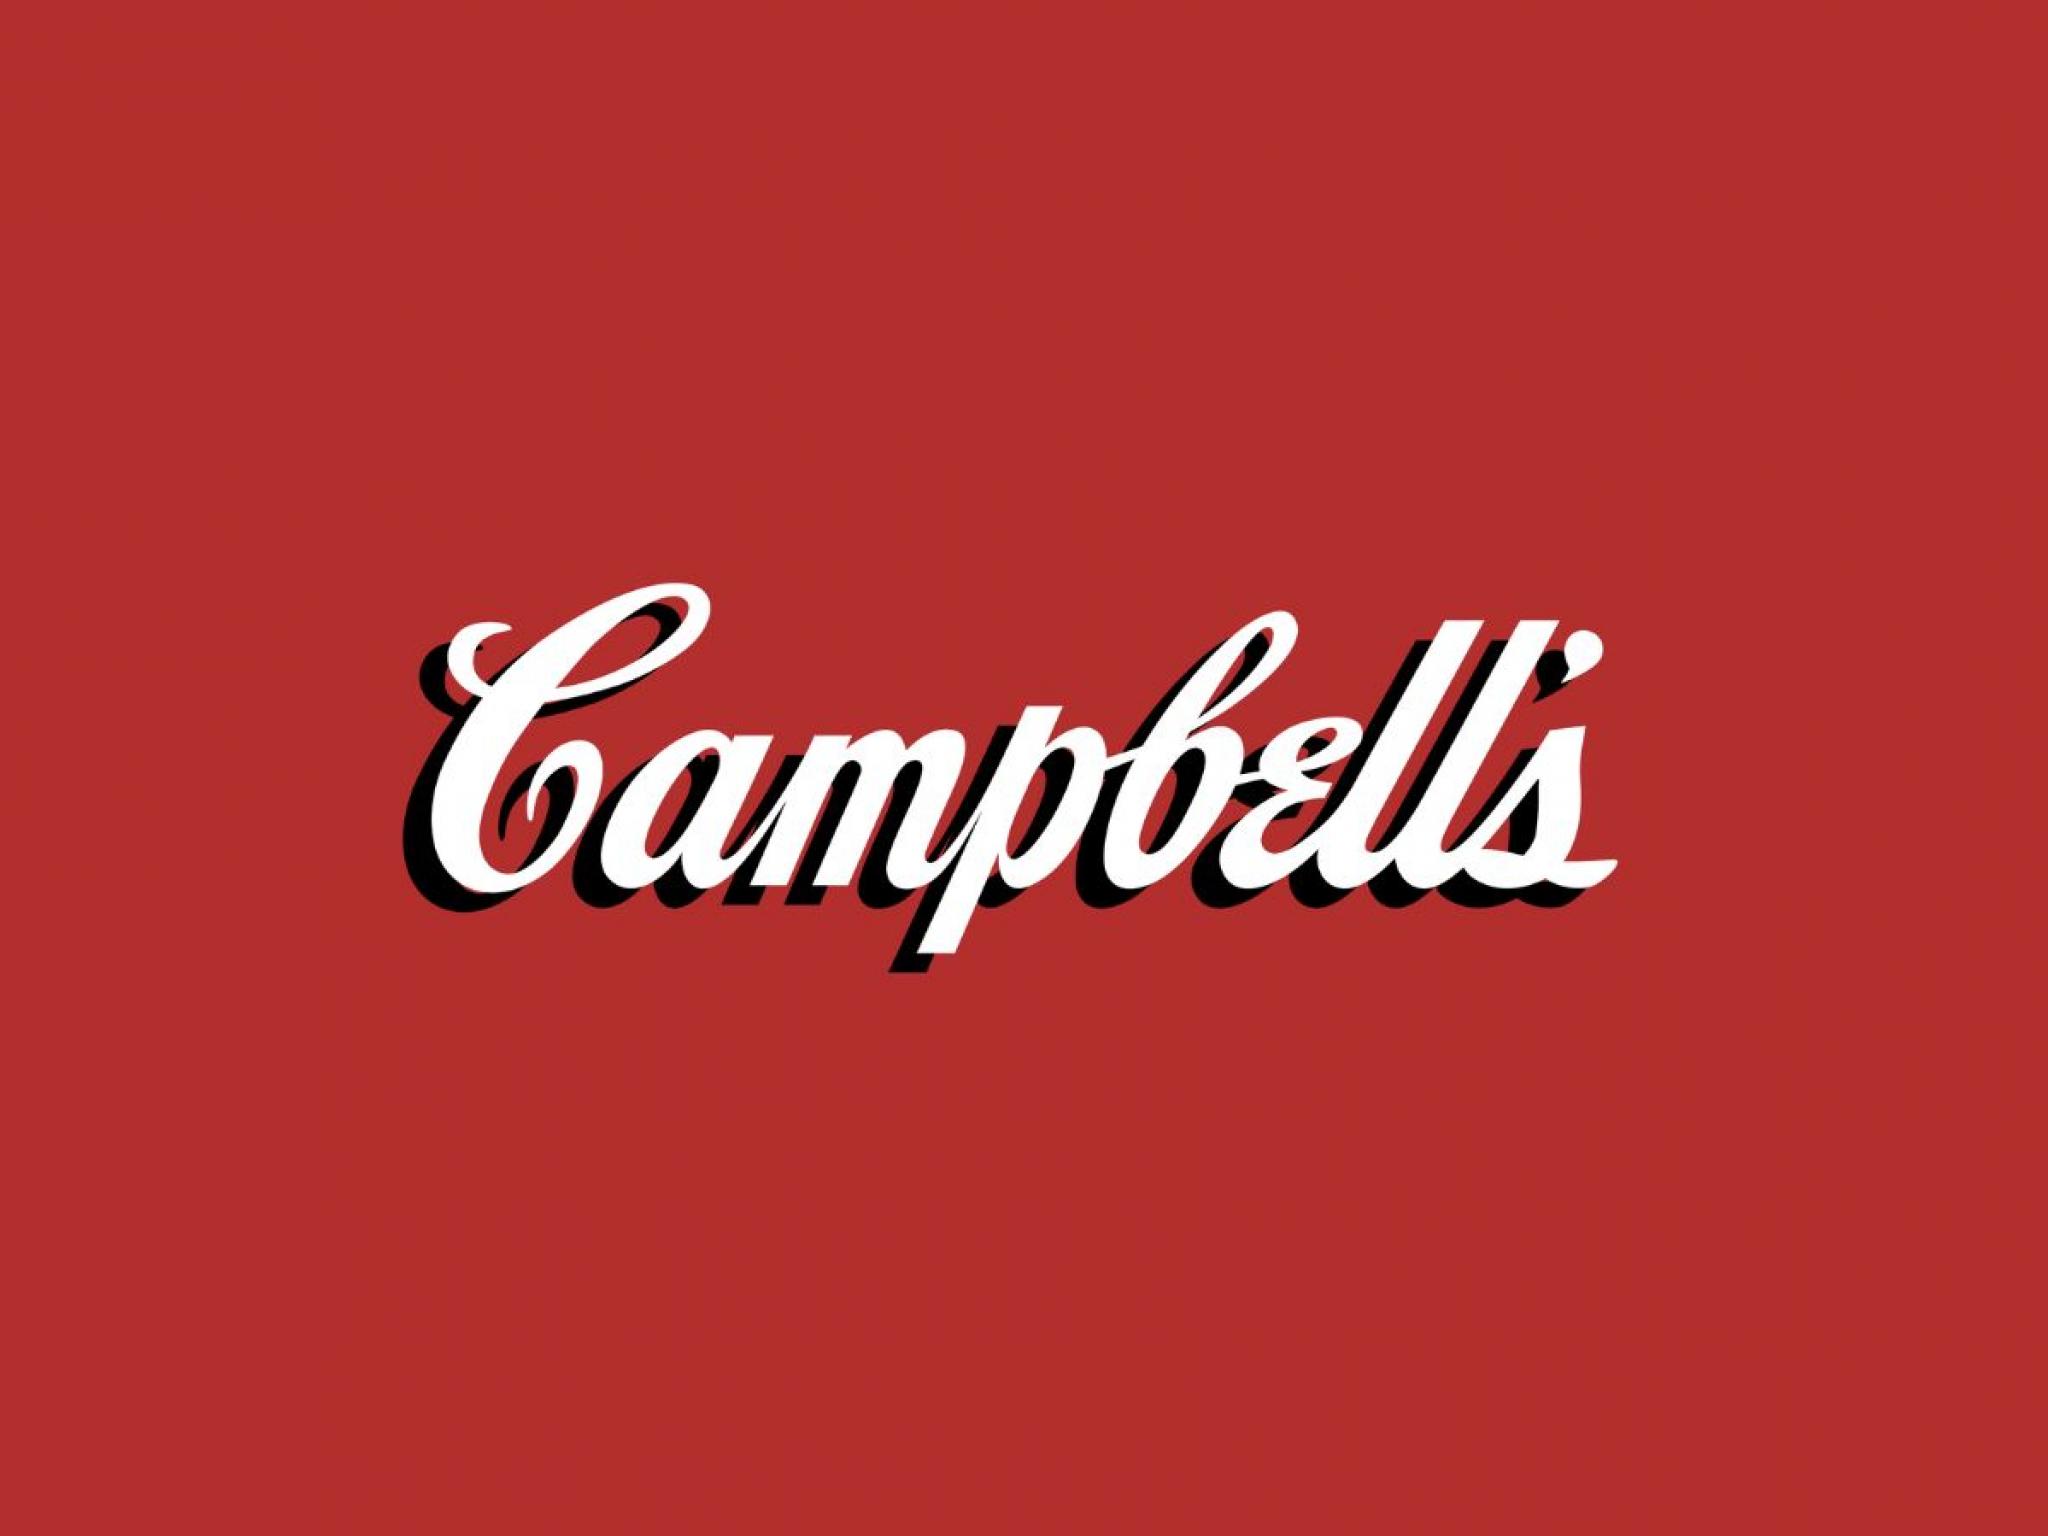  campbell-soup-box-and-3-stocks-to-watch-heading-into-wednesday 